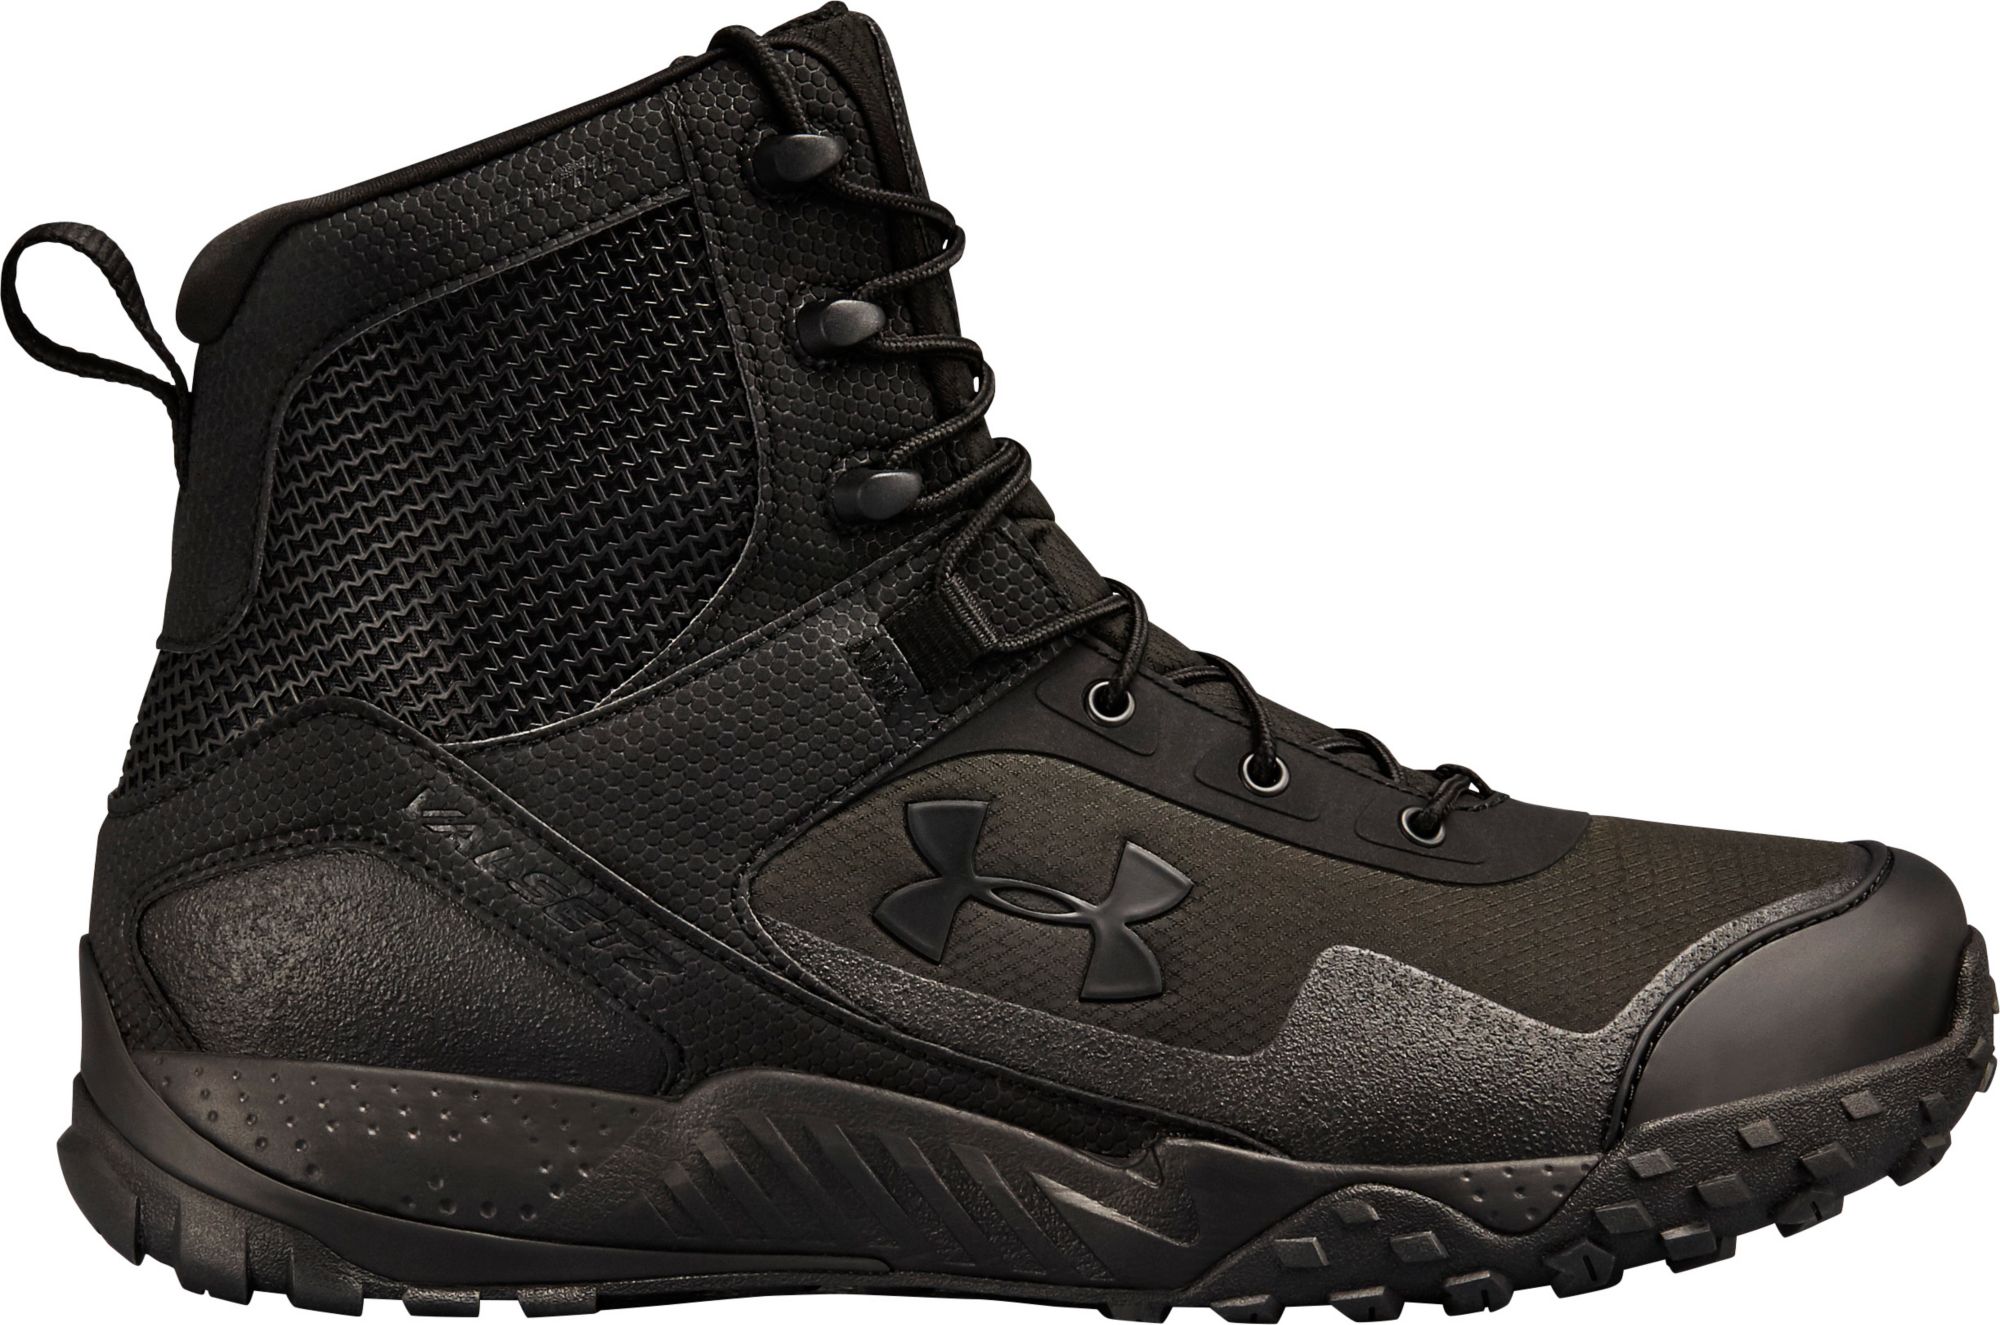 under armour black police boots